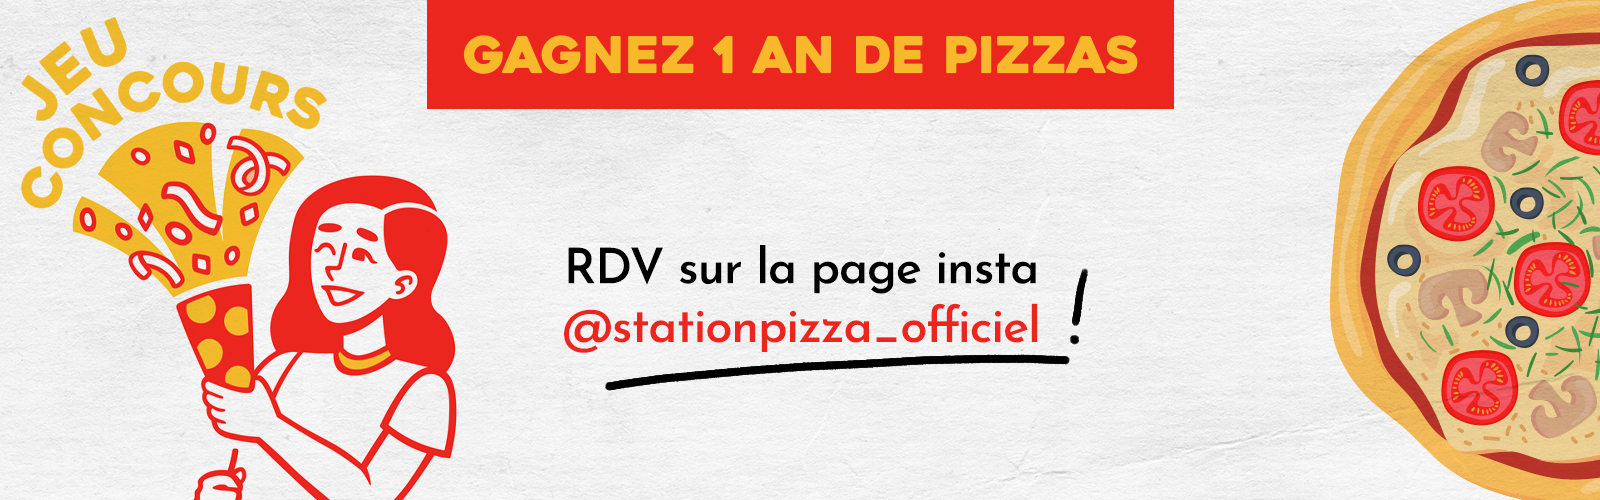 gagne_1_an_pizzas_station_pizza